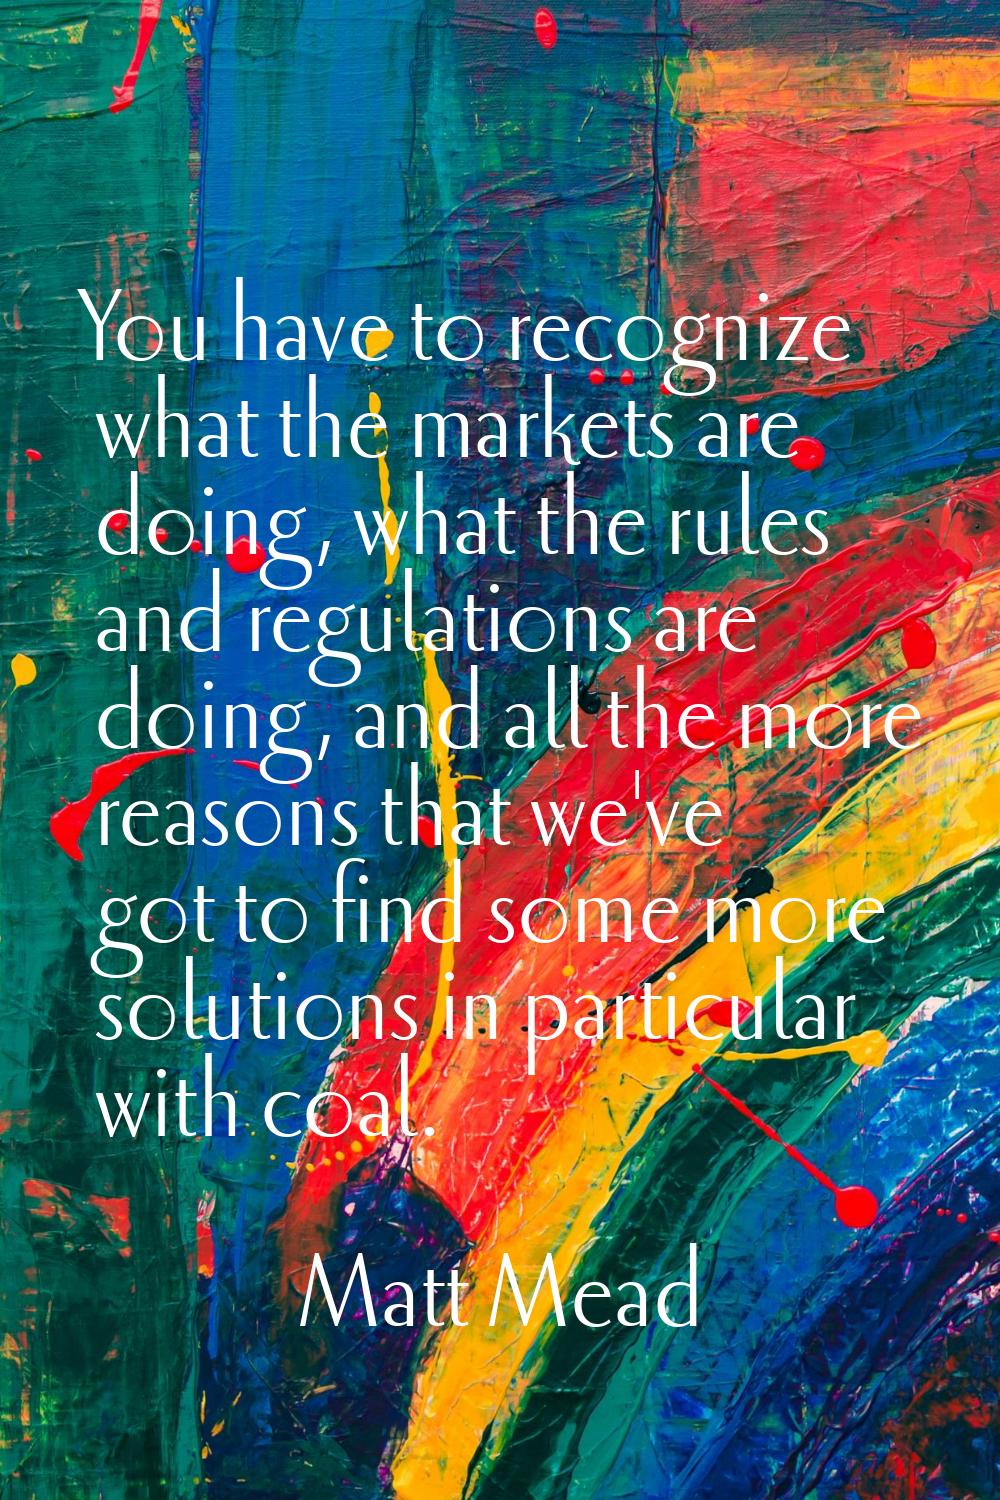 You have to recognize what the markets are doing, what the rules and regulations are doing, and all